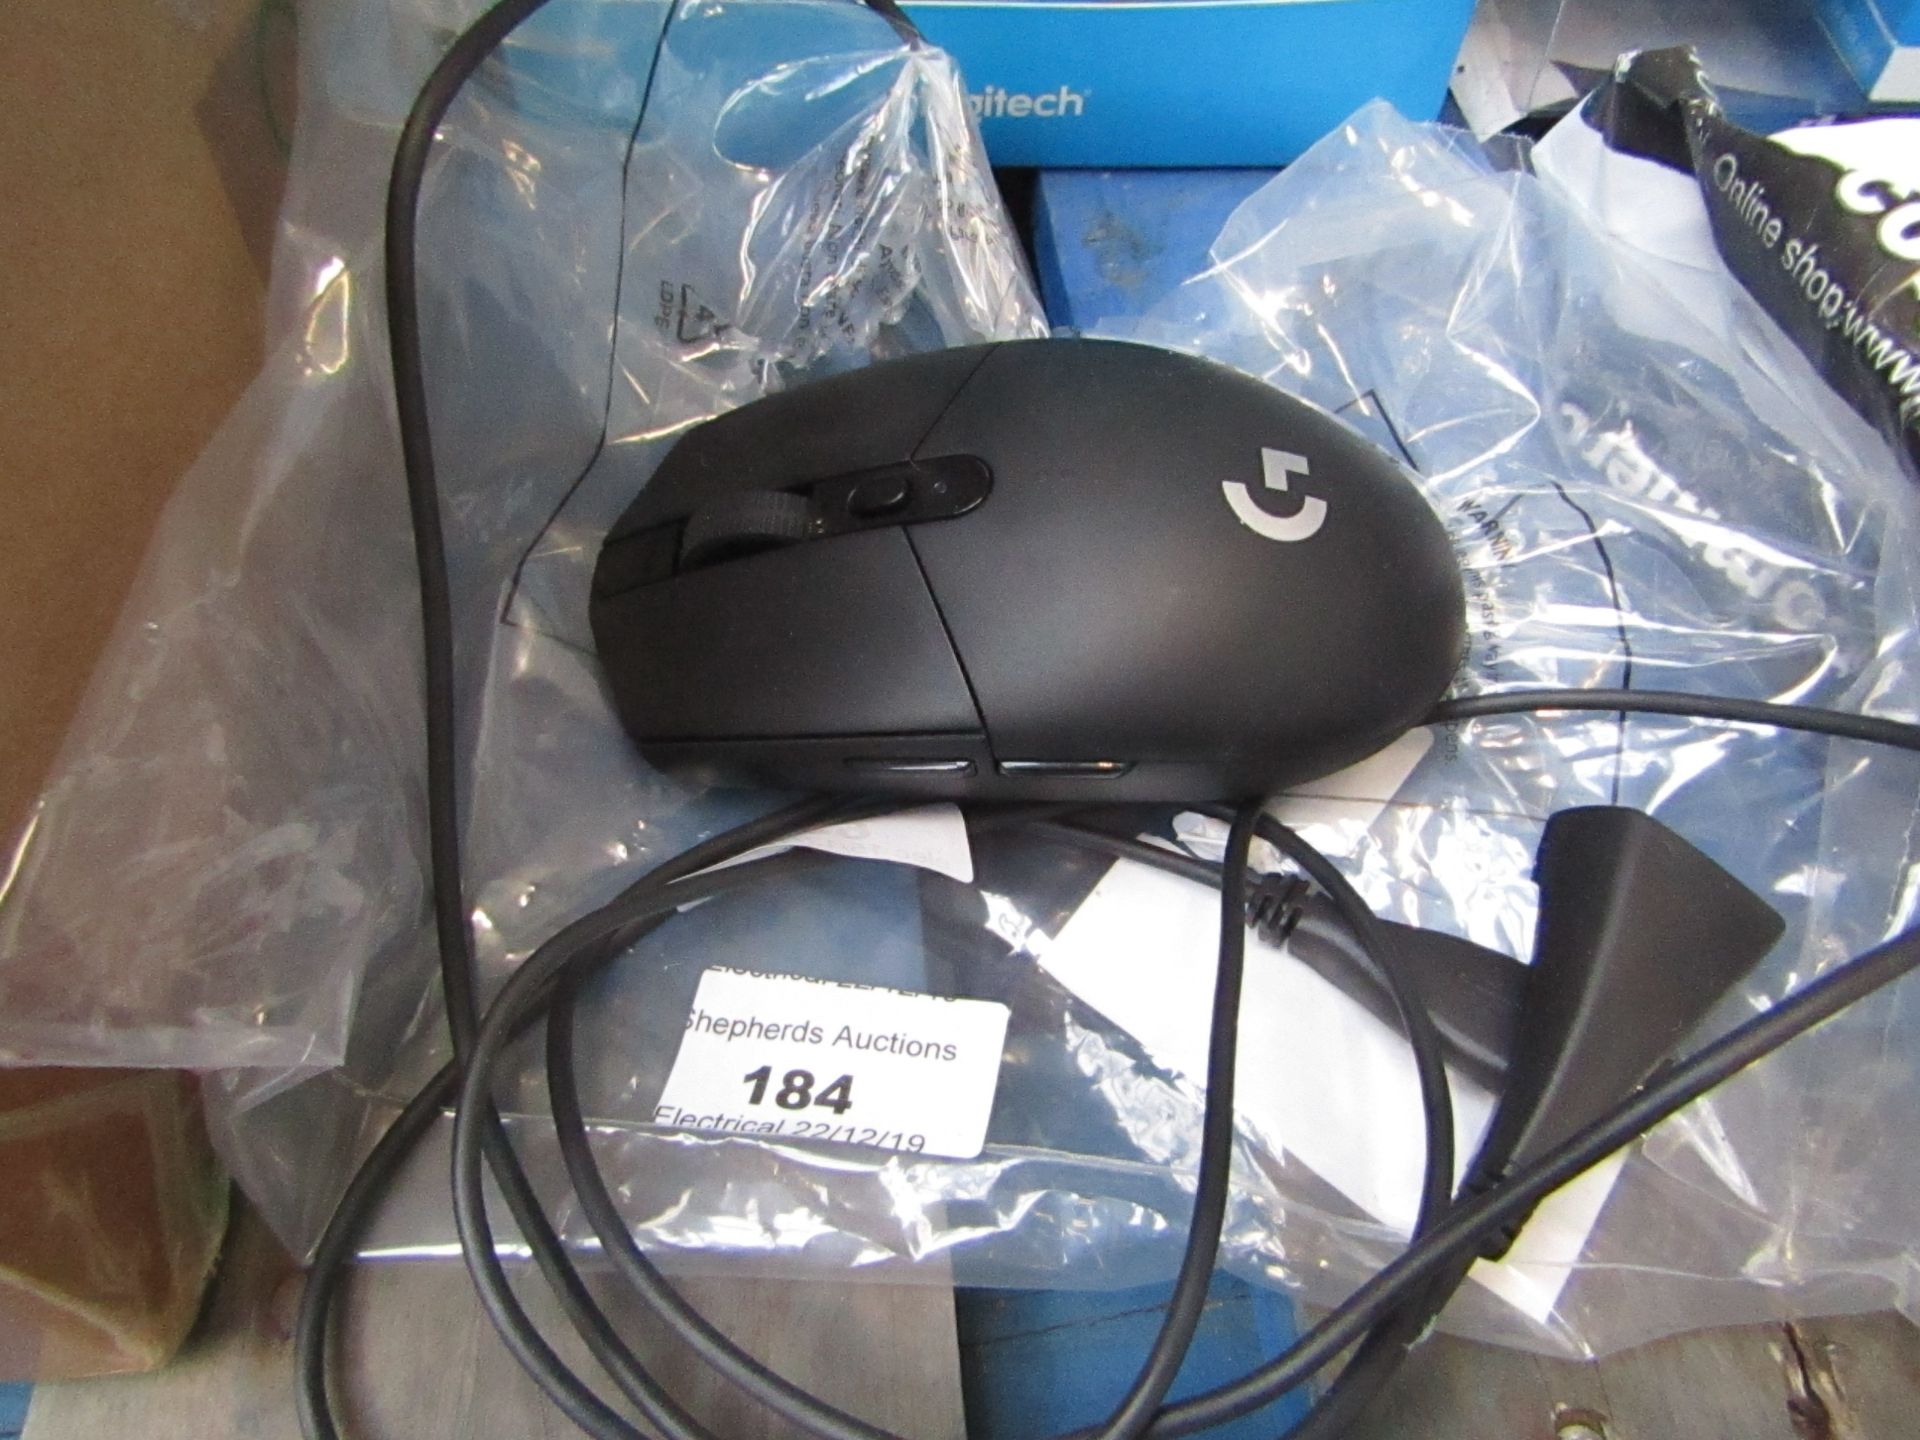 Logitech - G305 Wireless mouse untested.